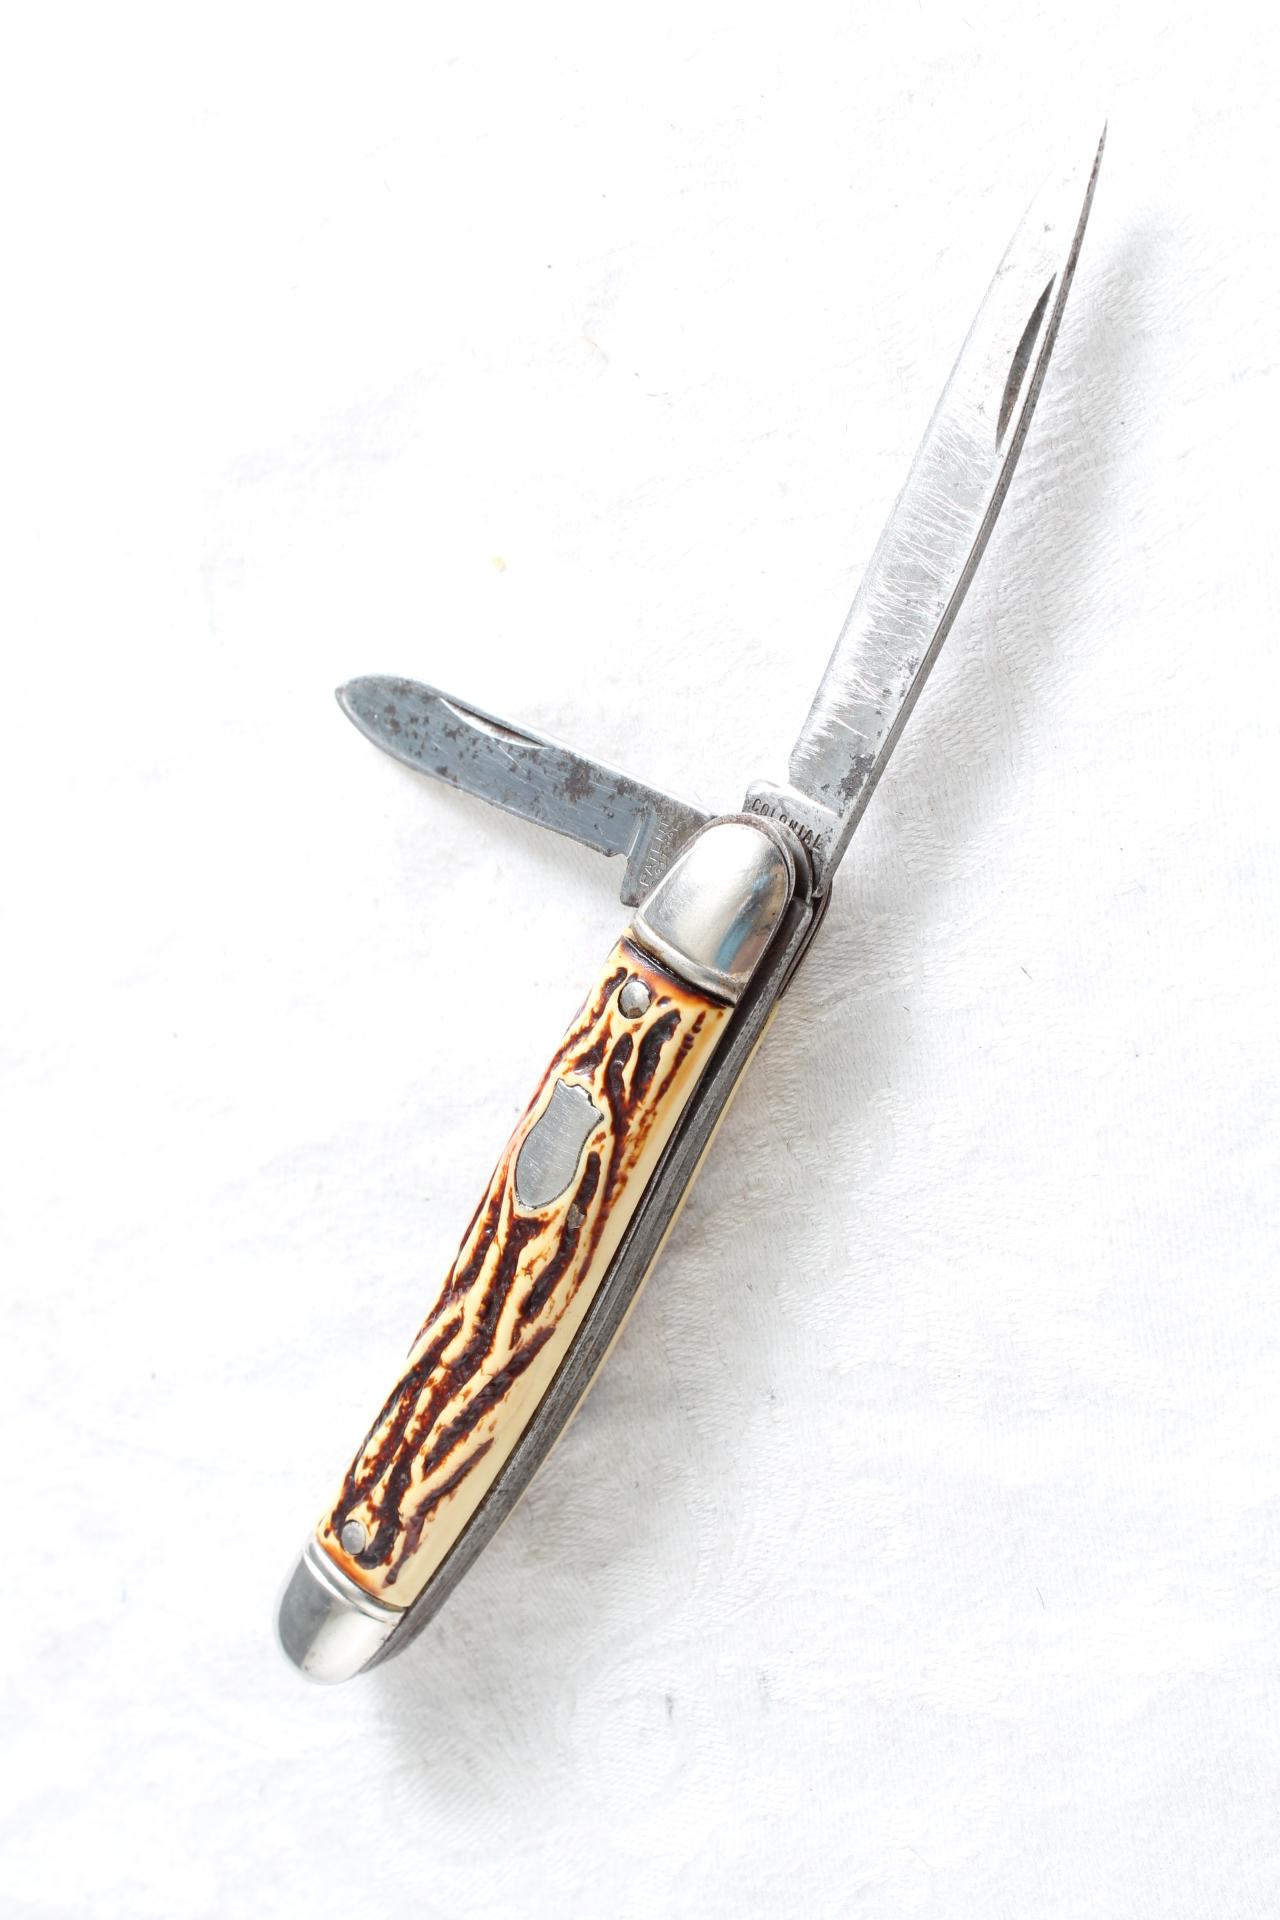 Vintage COLONIAL 2 Blade Pocket Knife Made in USA